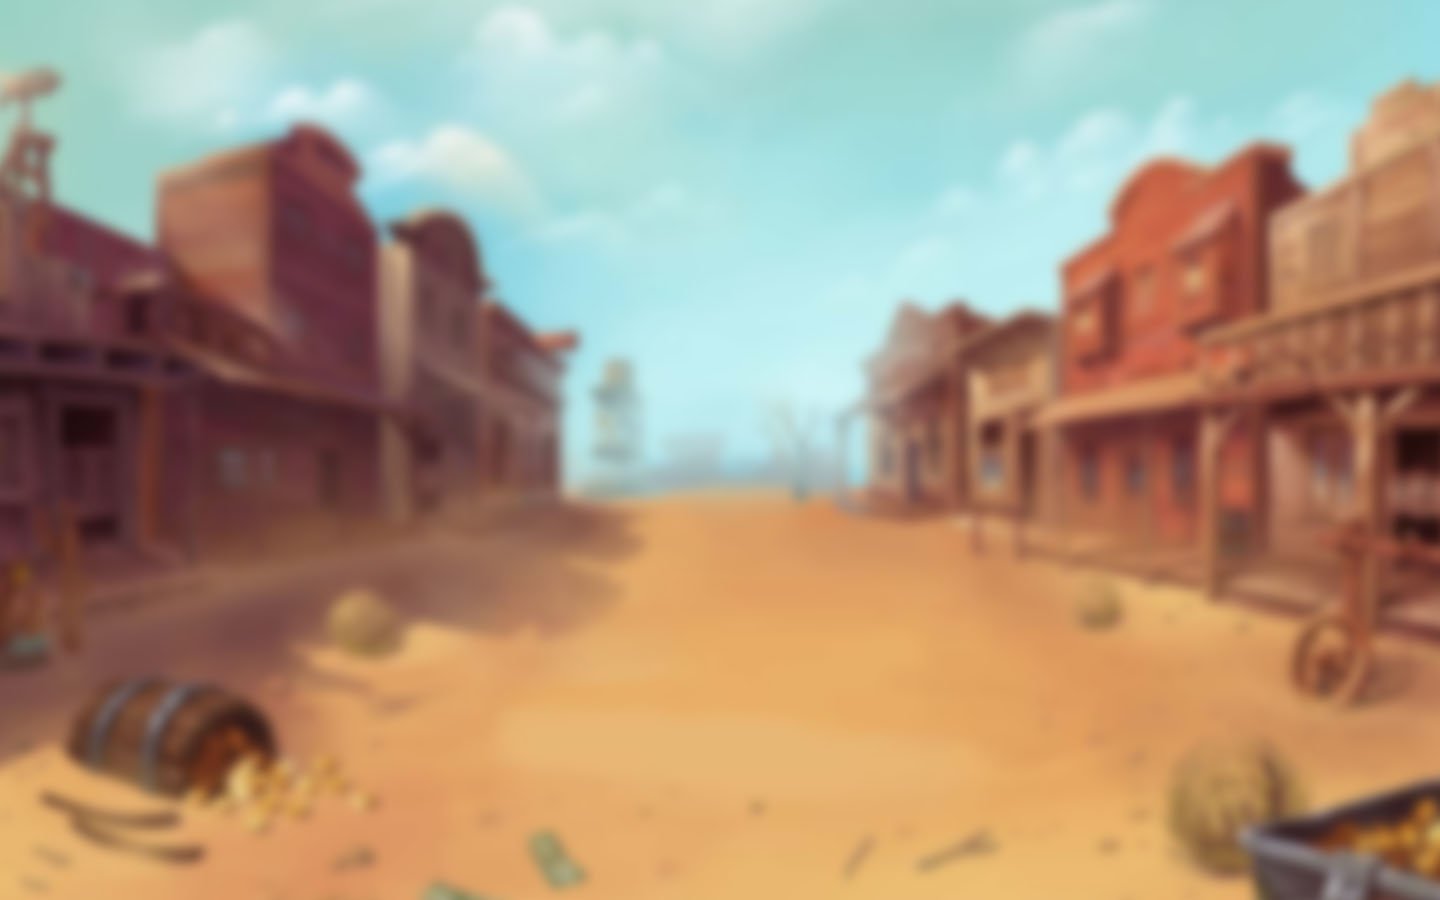 Old West